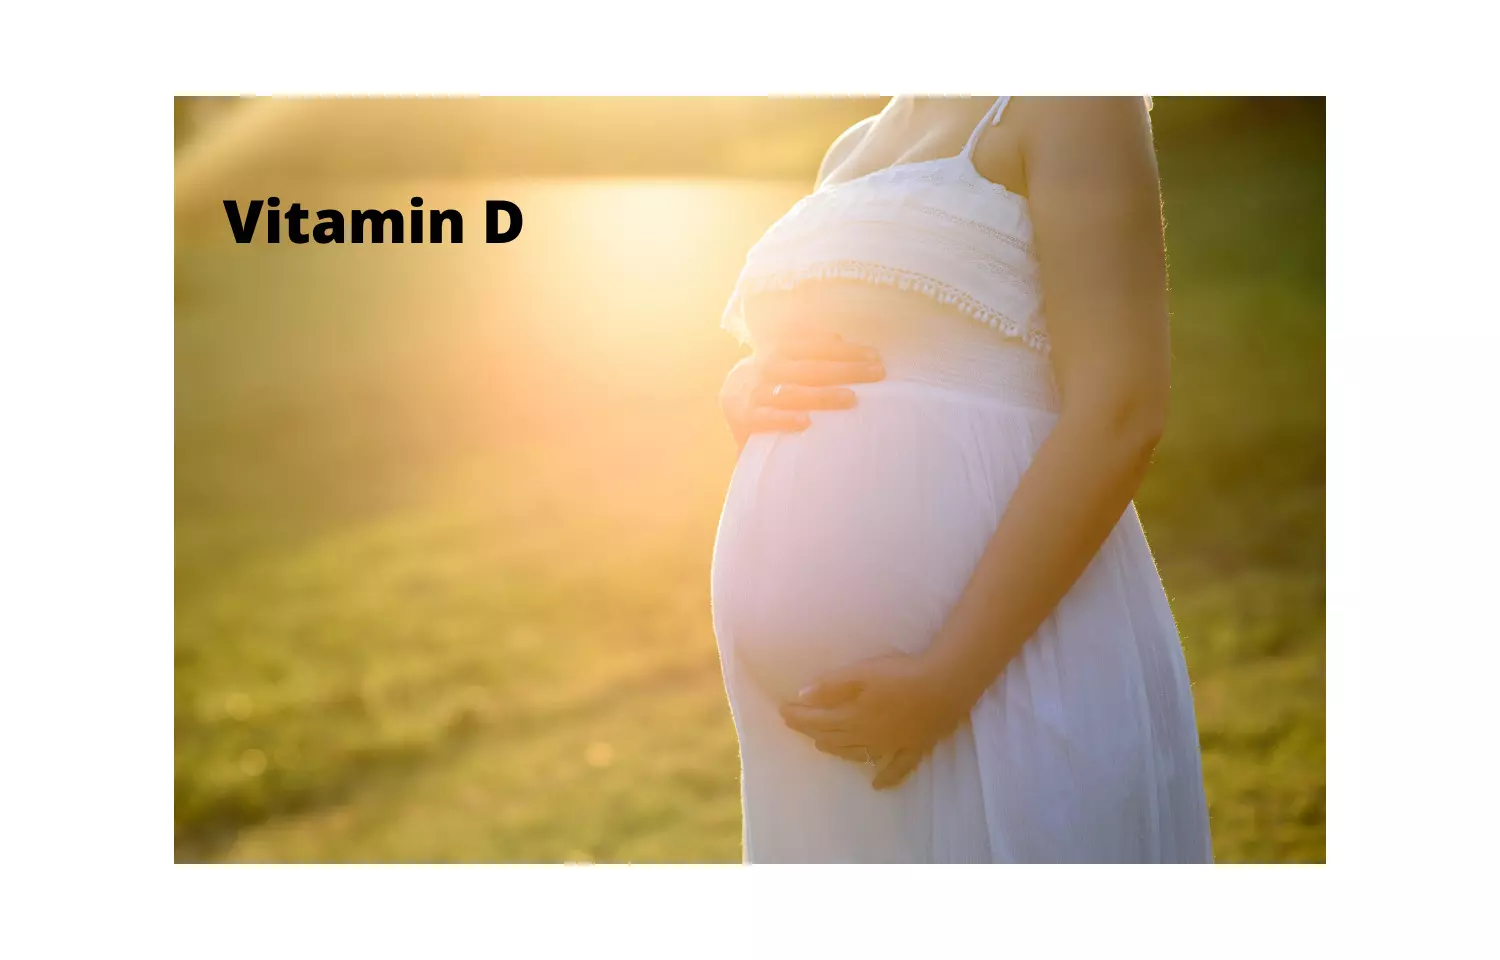 Higher vitamin D intake during pregnancy may protect children from being overweight: BMJ